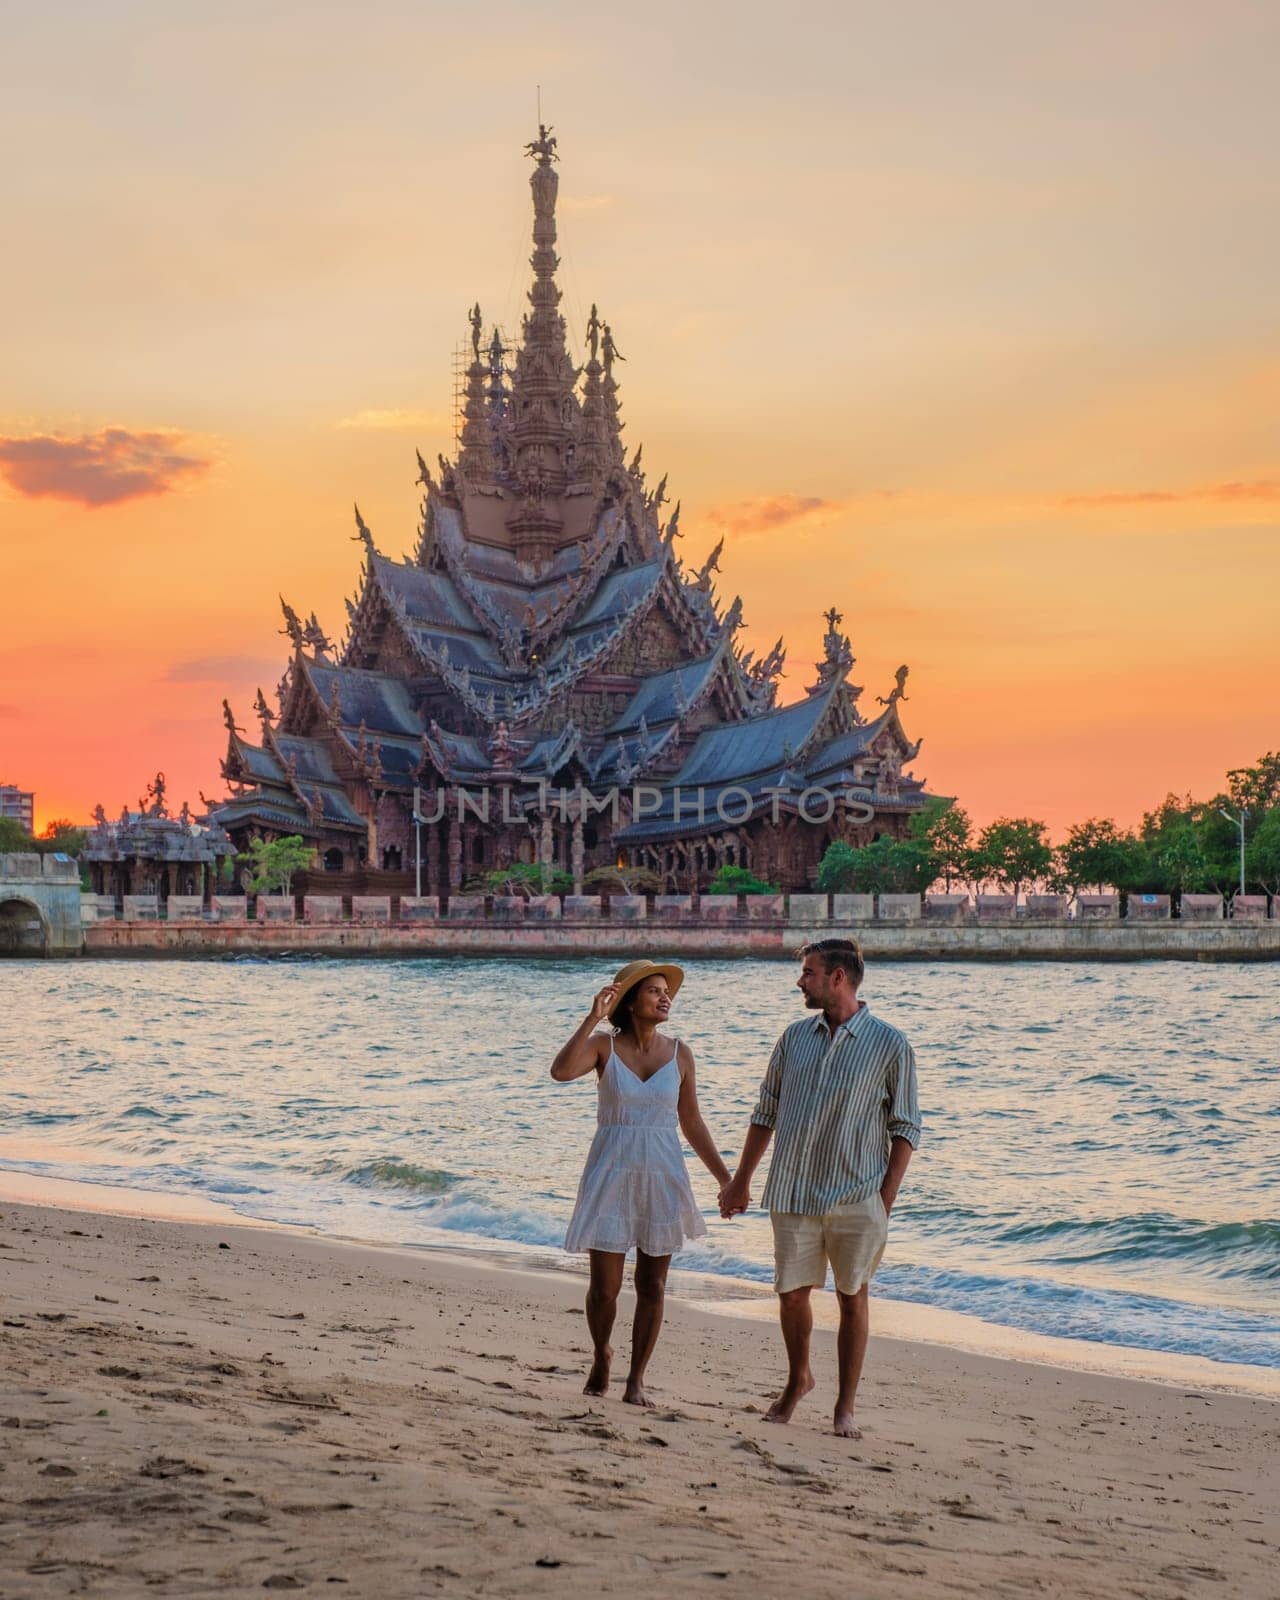 A diverse multiethnic couple of European men and Asian women visit The Sanctuary of Truth wooden temple in Pattaya Thailand at sunset